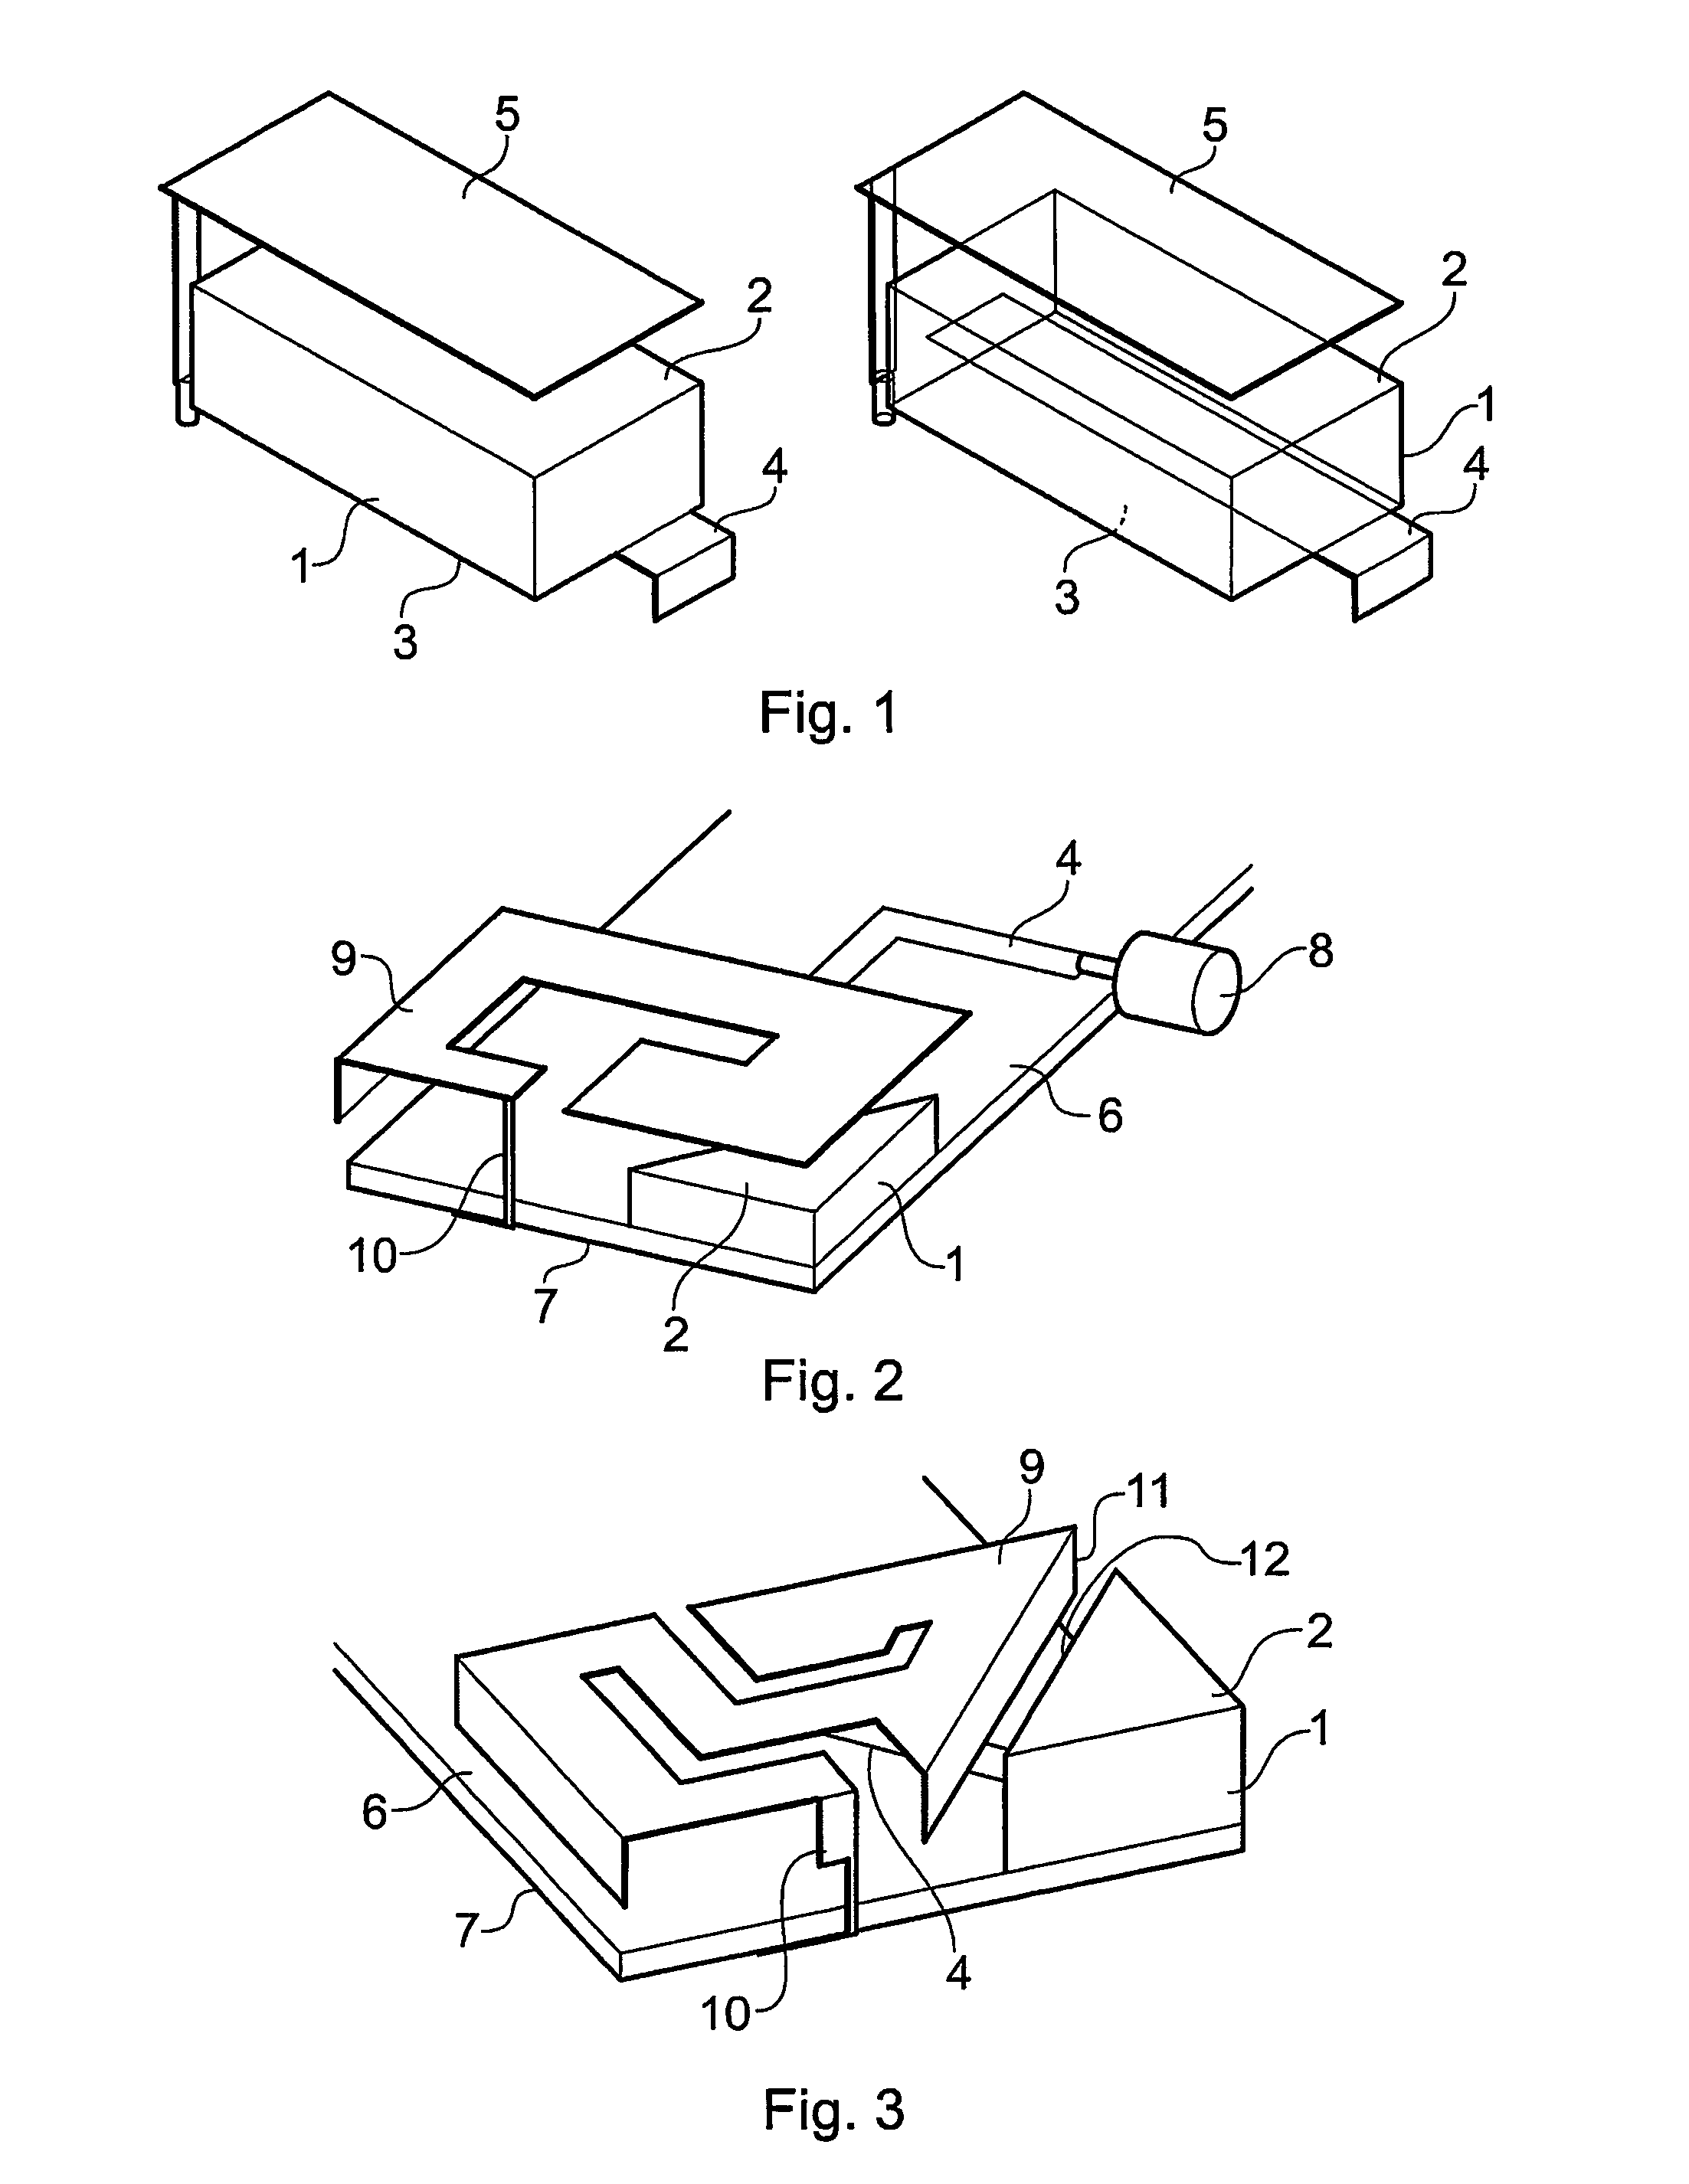 Hybrid antenna using parasitic excitation of conducting antennas by dielectric antennas